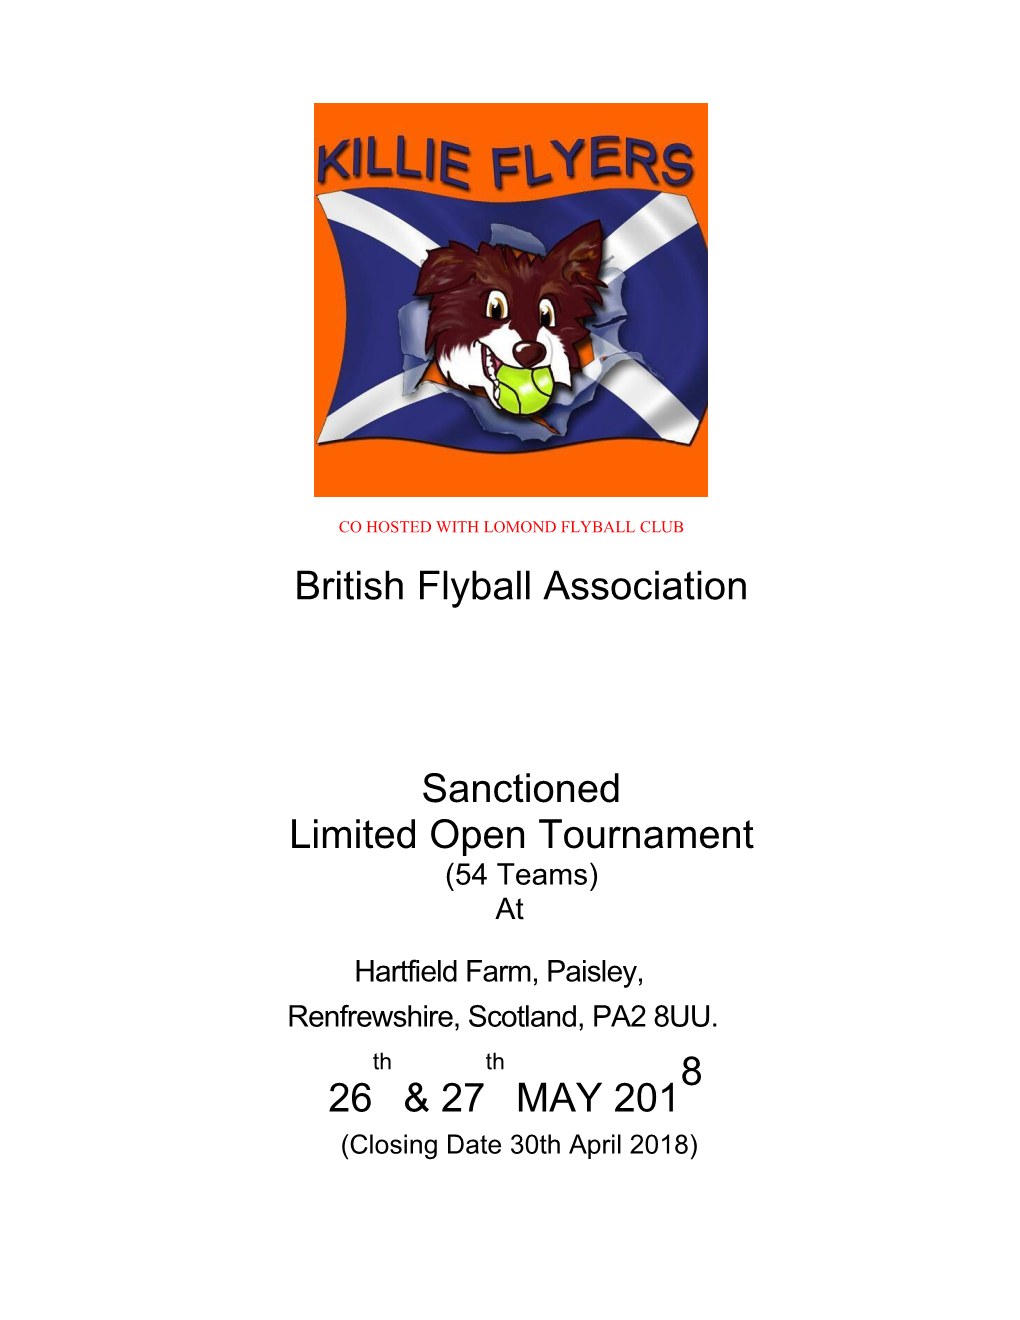 Co Hosted with Lomond Flyball Club